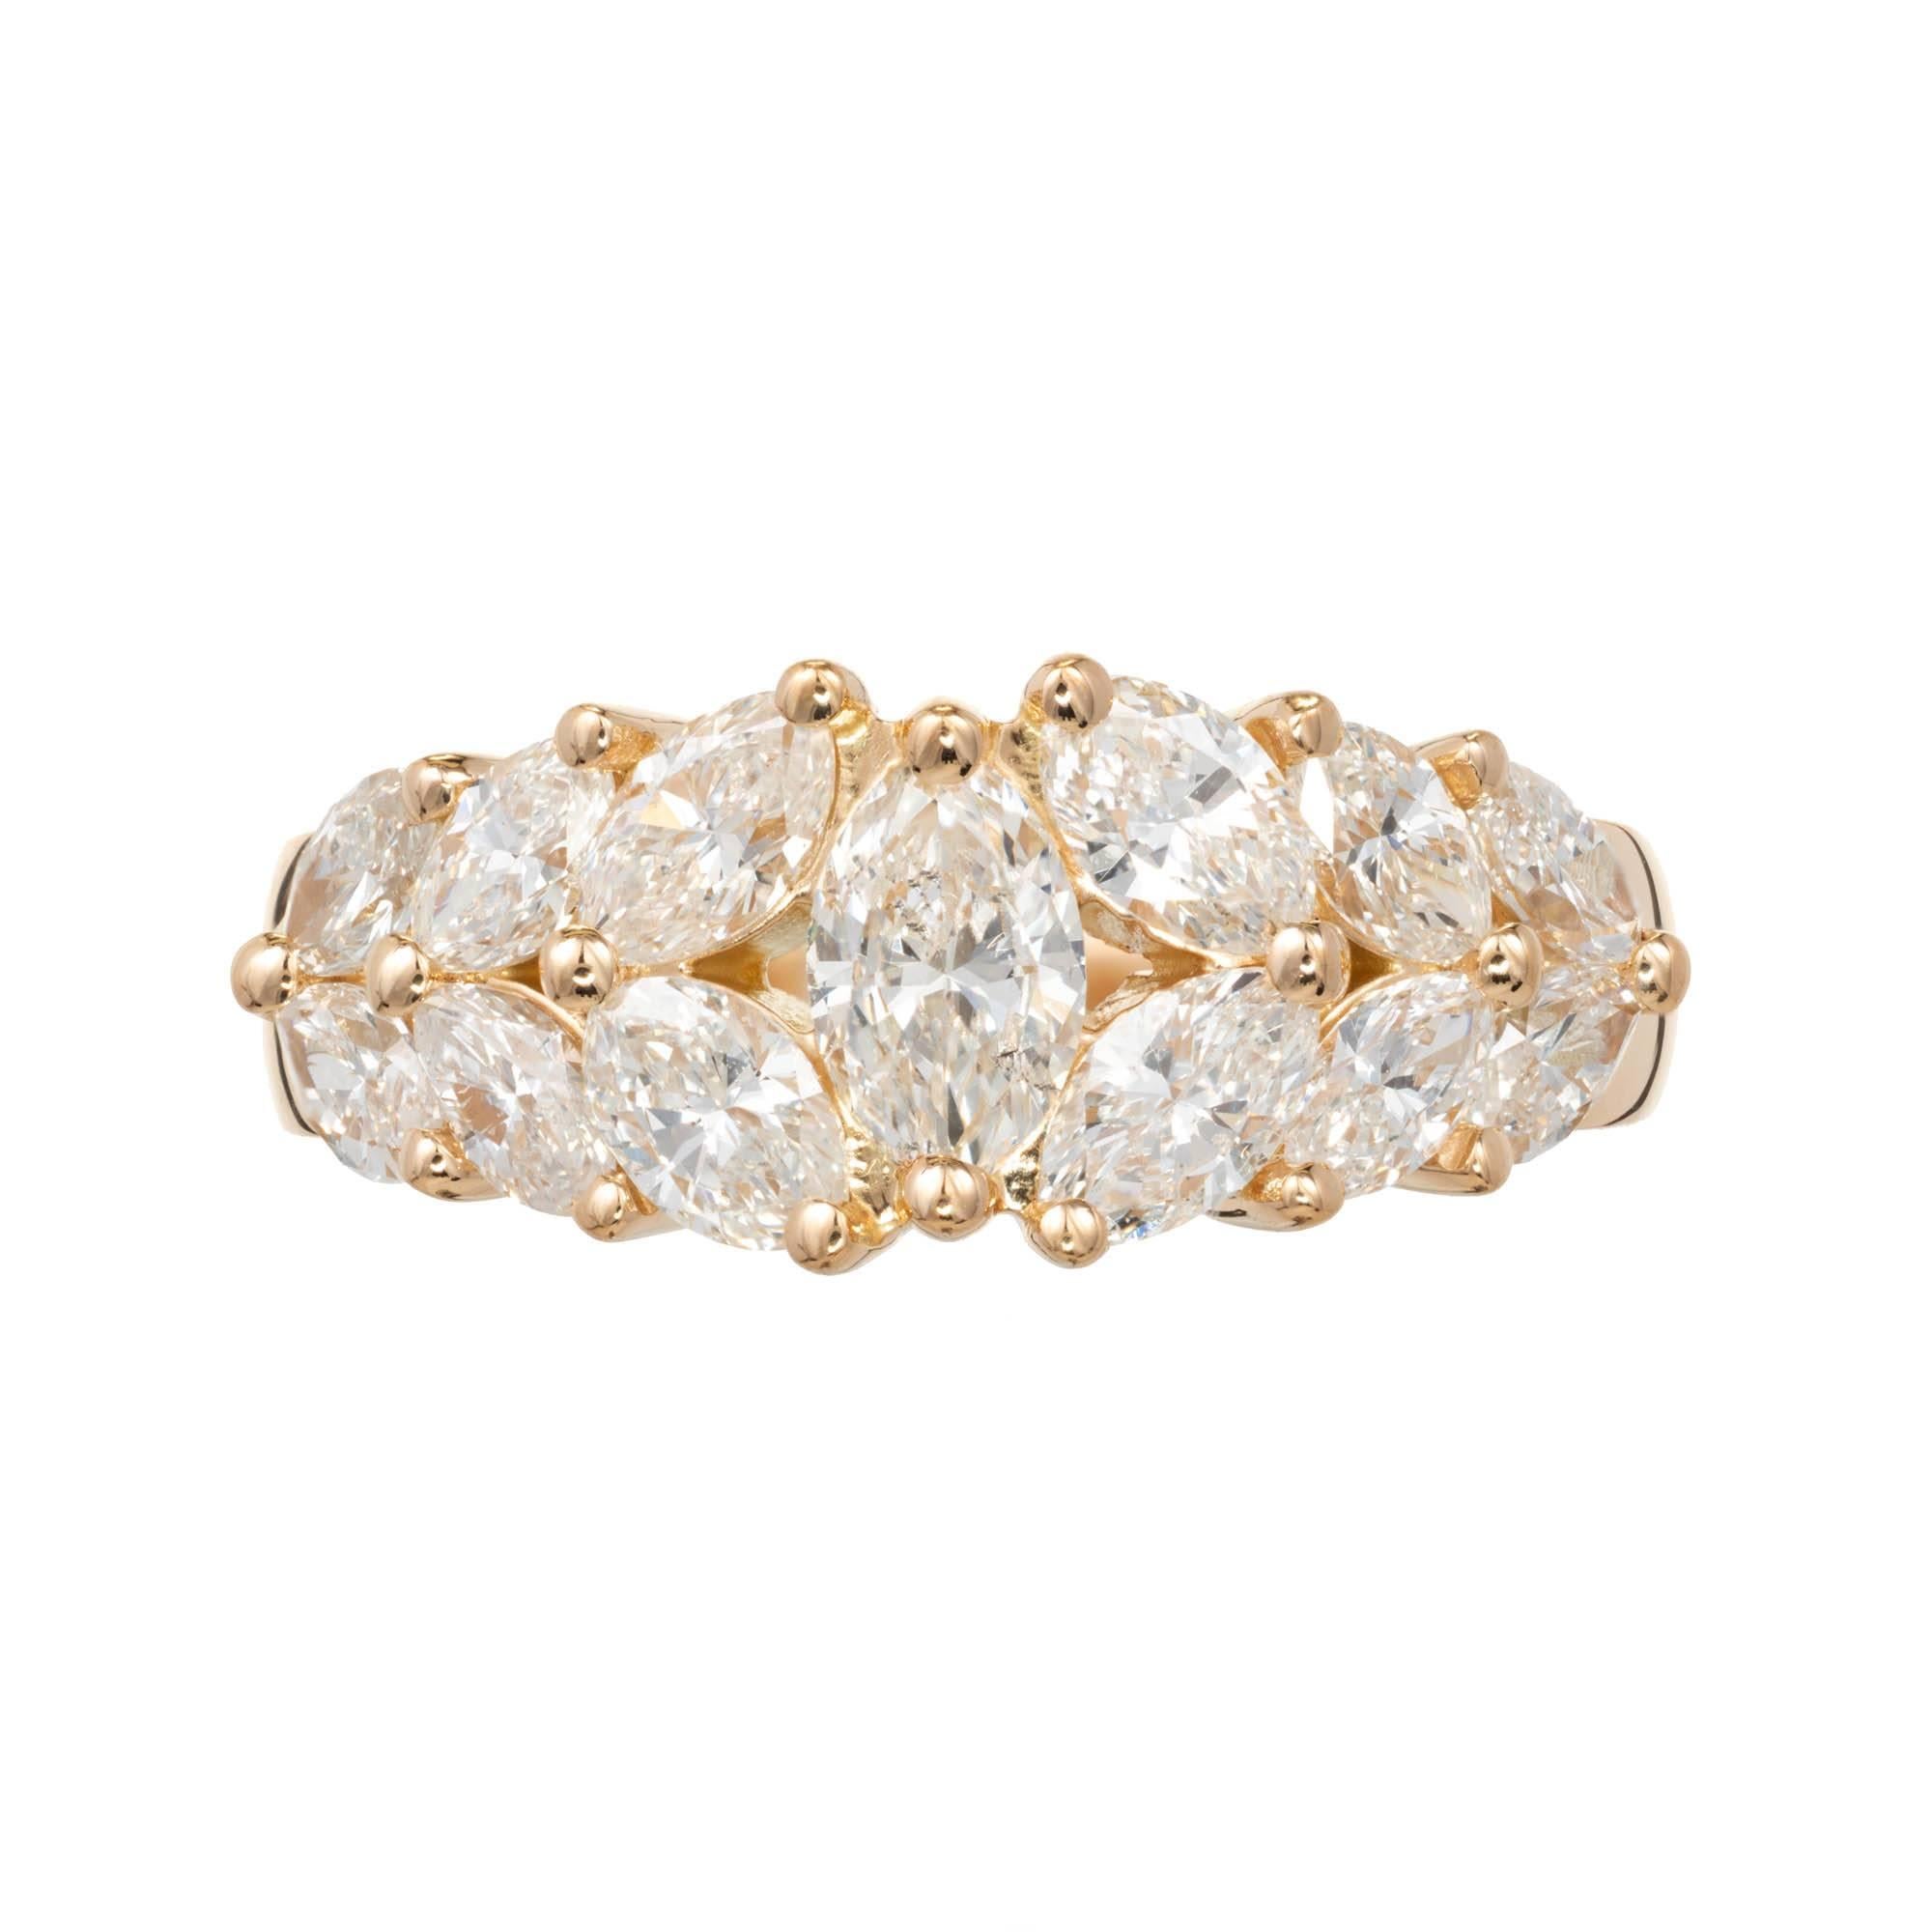 Peter Suchy handmade 1.00ct marquise diamond custom engagement ring or wedding band, in 18k yellow gold.

13 Marquise diamonds H to I approximate 1.00 carats
Size: 6 ¼ and sizable
18k Yellow Gold
Stamped: 18k
Tested: 18k
5.9 Grams
8.45mm wide at